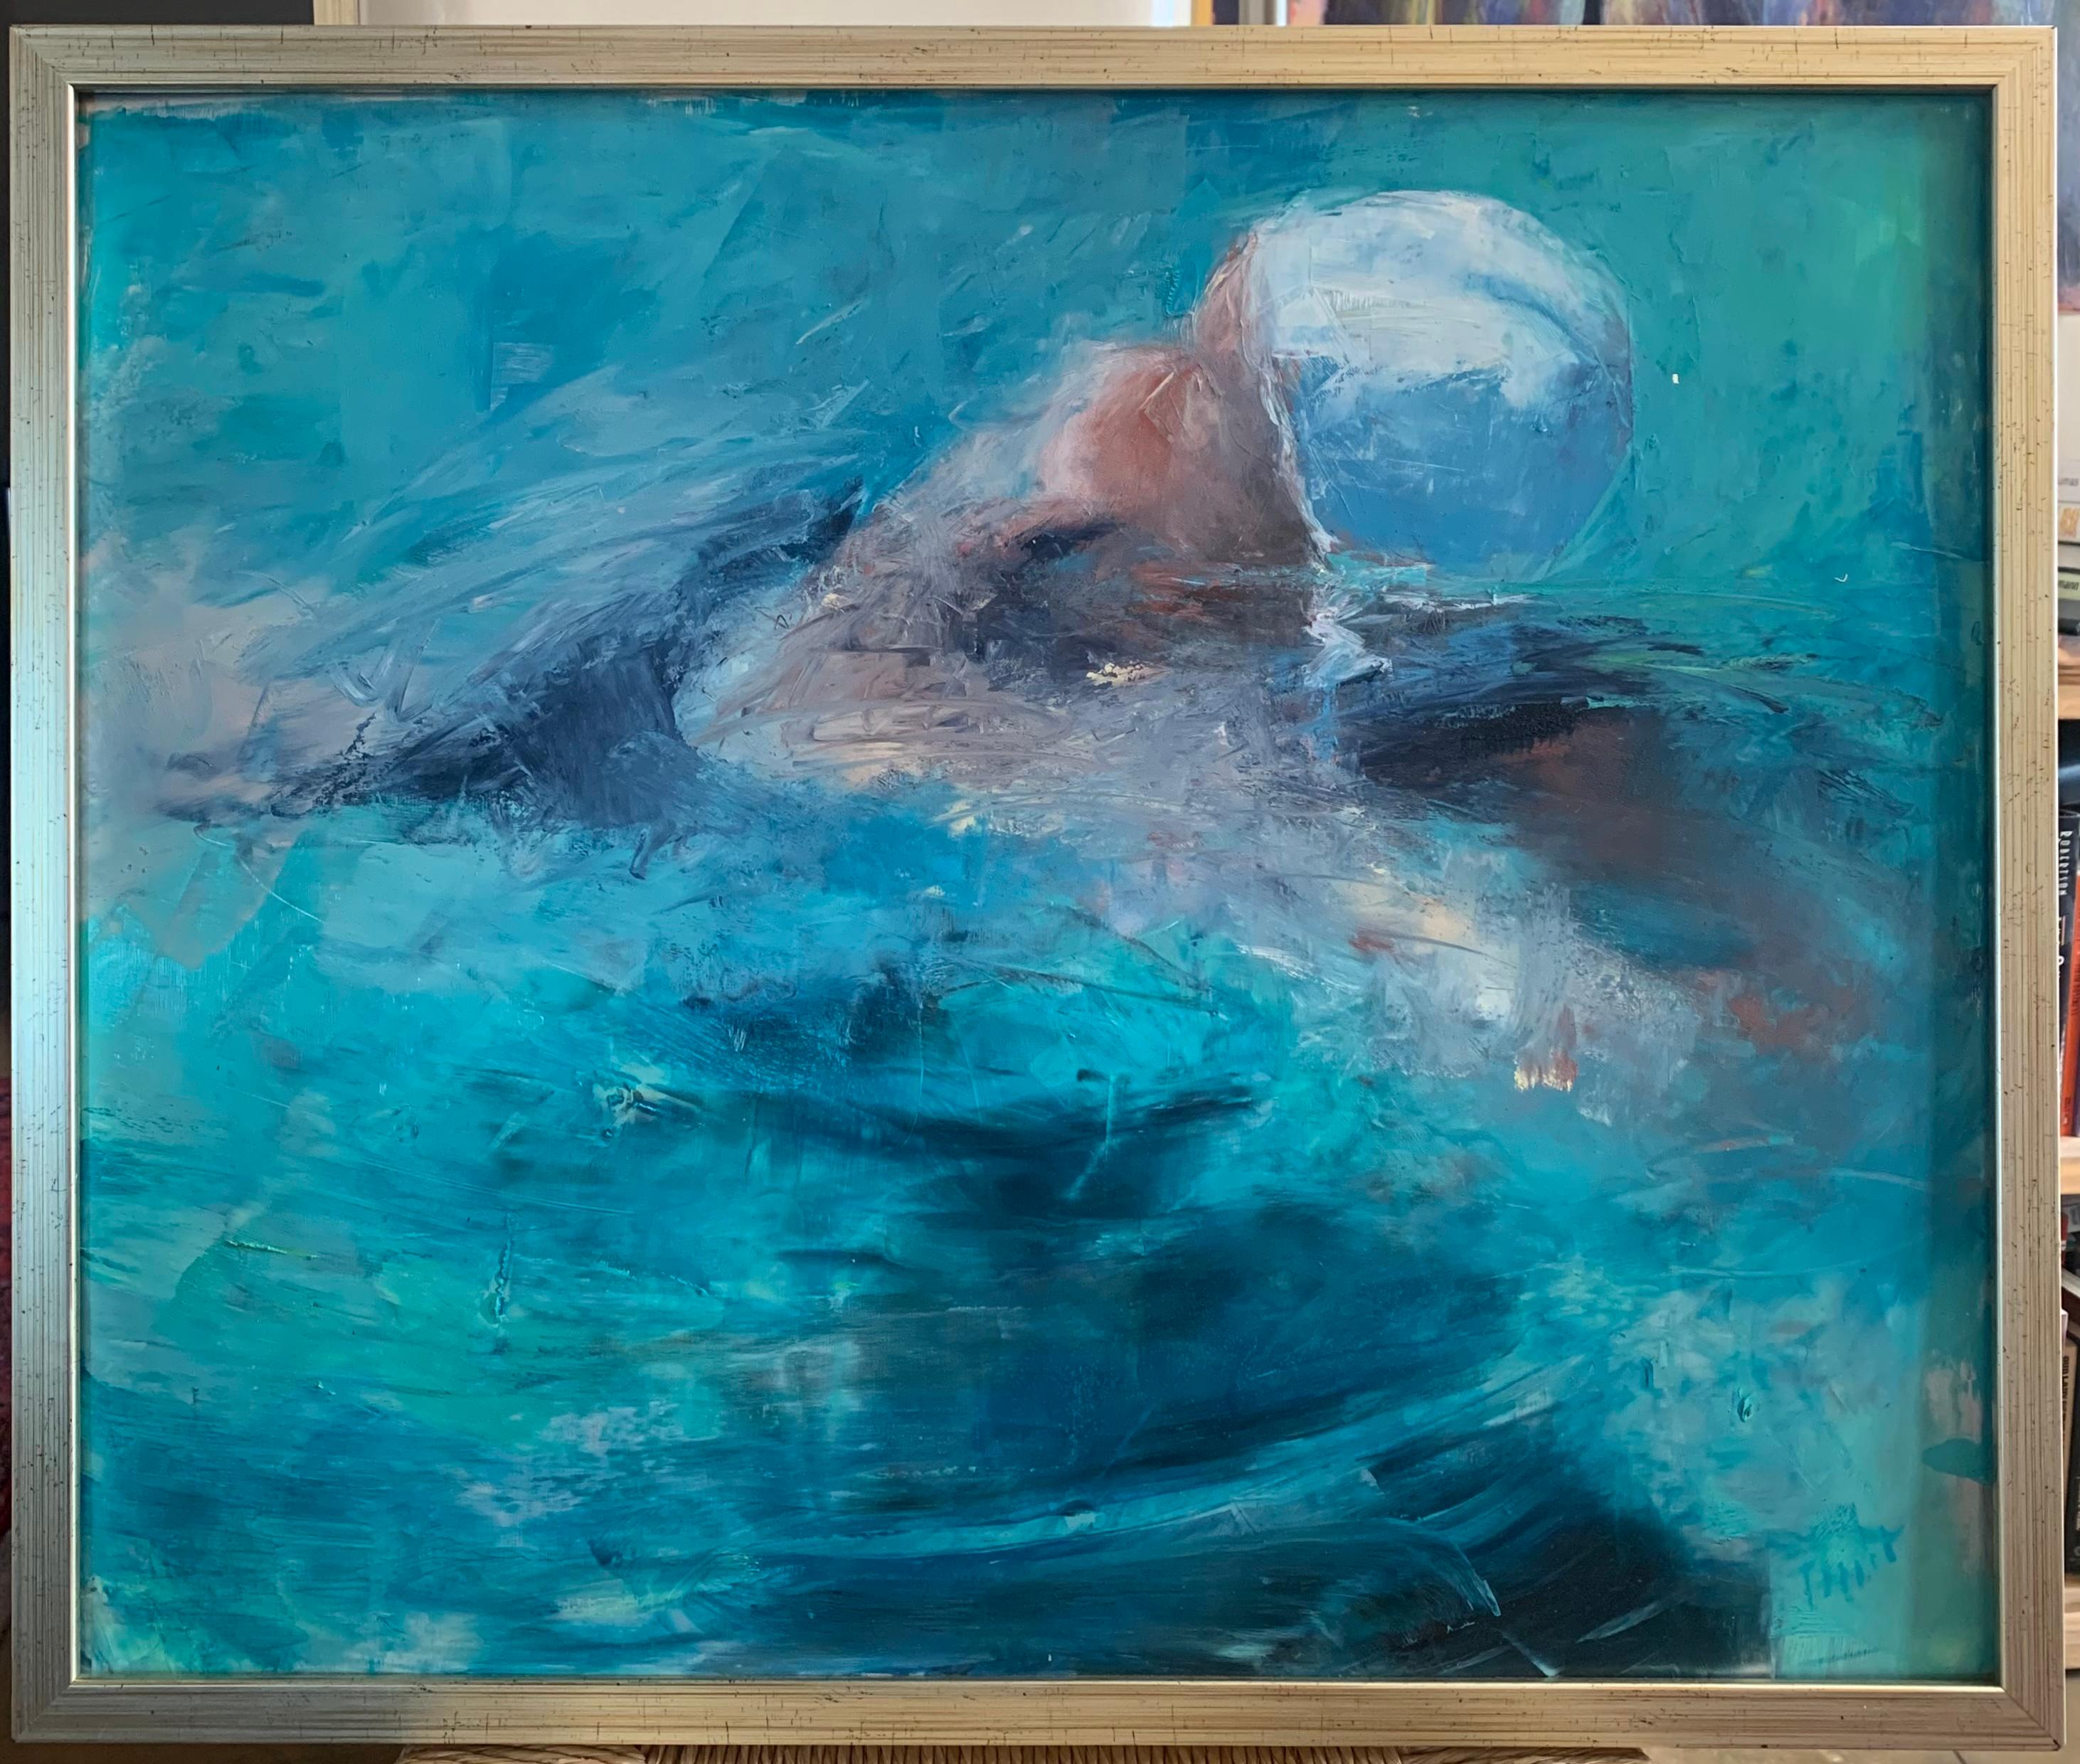 Side Stroke
24.0 x 30.0 x 1.0, 5.0 lbs 
Oil Paint
Hand signed by artist 

Description:
An original, contemporary oil painting by Carol Tippit Woolworth. Woolworth uses expressive and gestural marks to depict a woman swimming through the bright blue